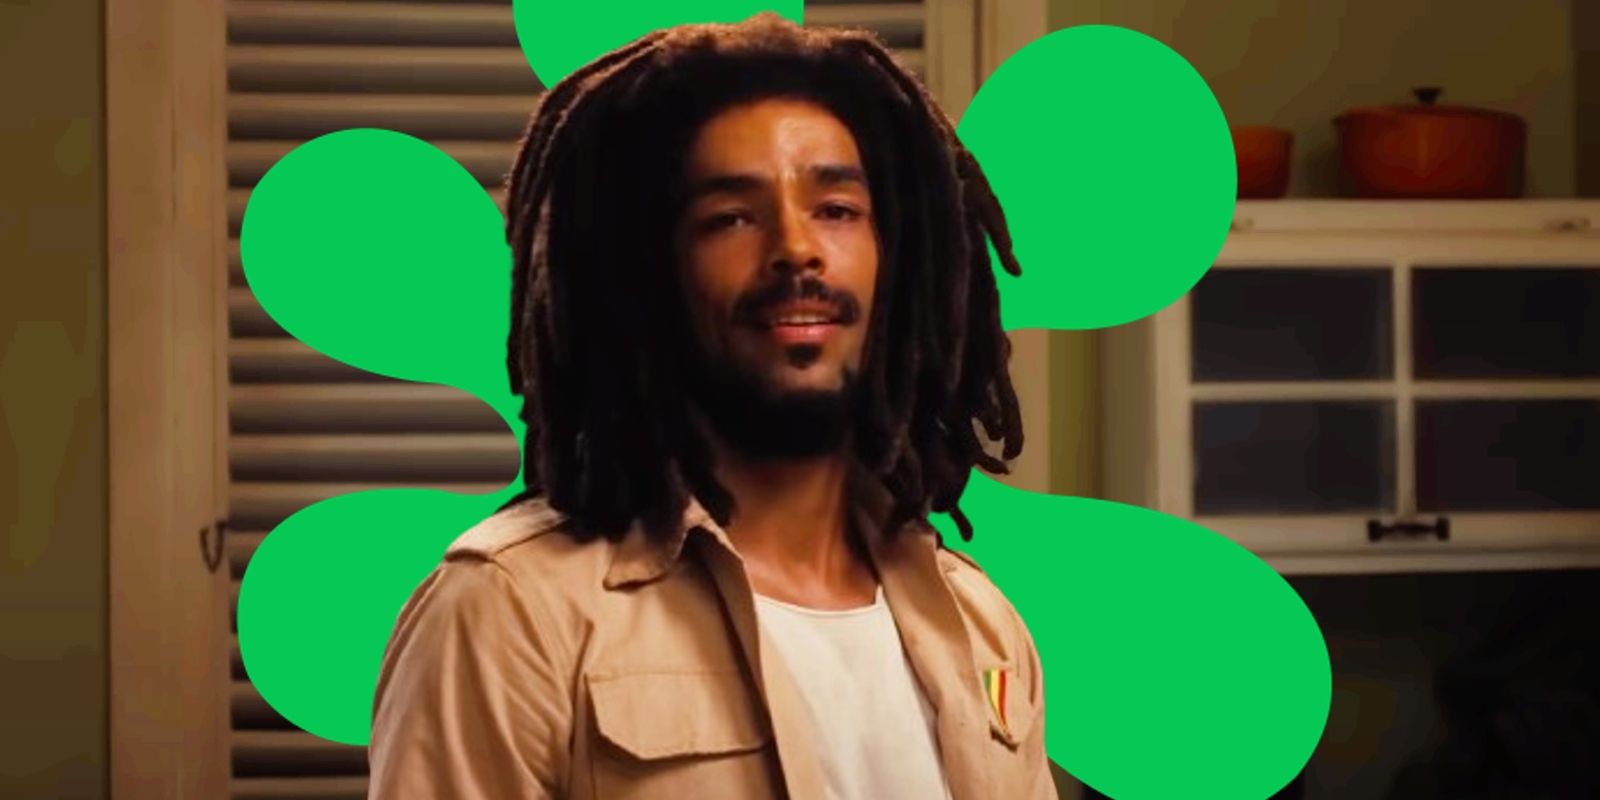 bob-marley-movie-overperforms-in-box-office-opening-despite-poor-reviews-&-low-rt-score